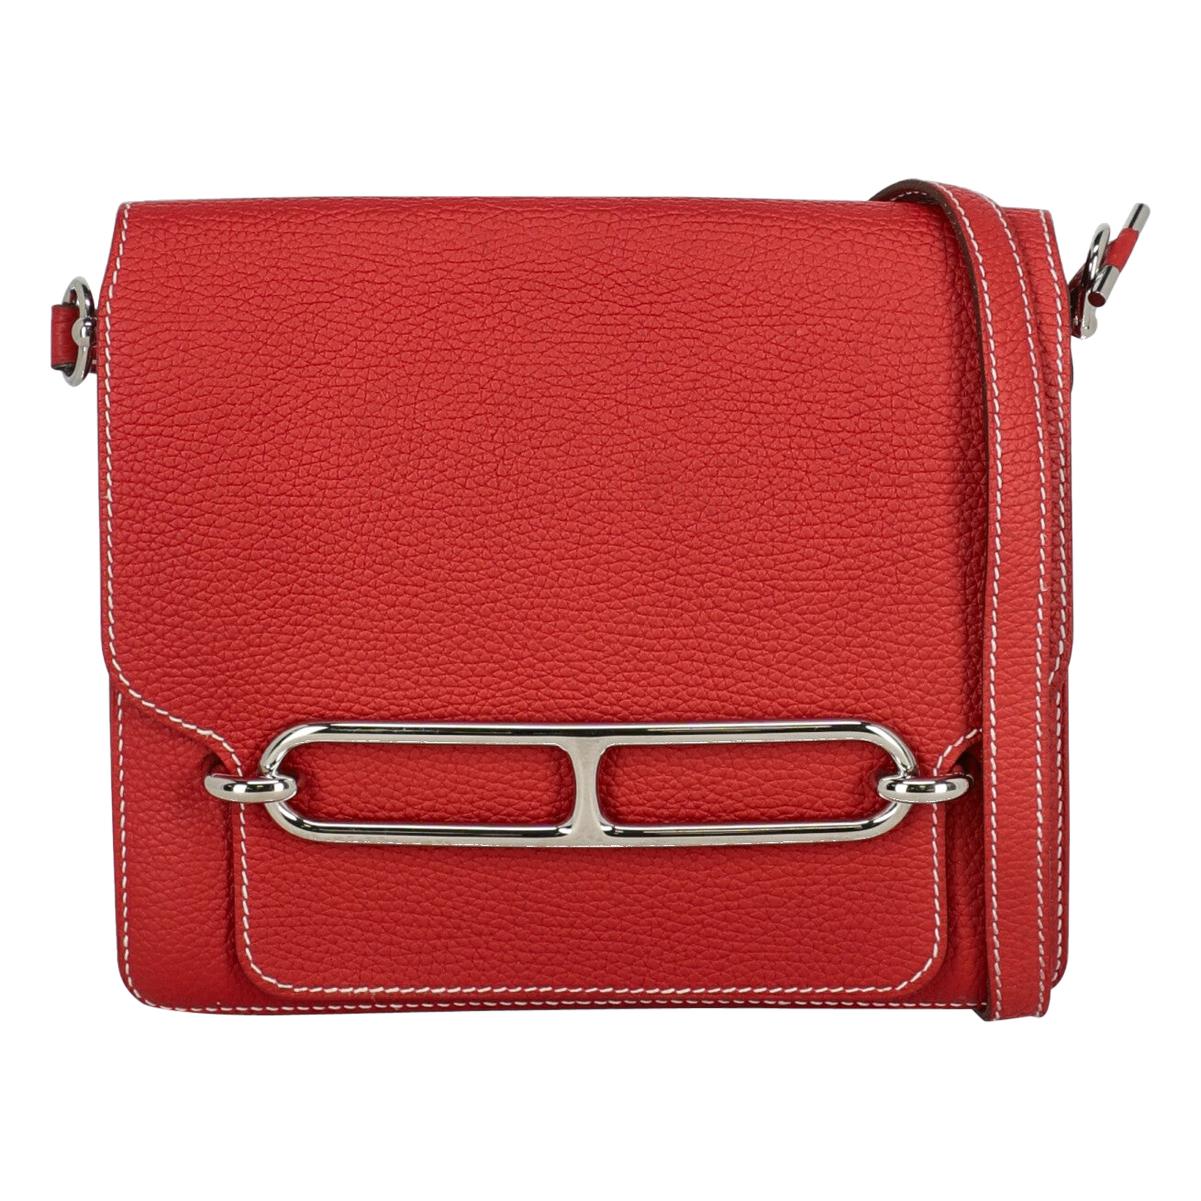 Hermès women’s Cross body bag Red Leather For Sale